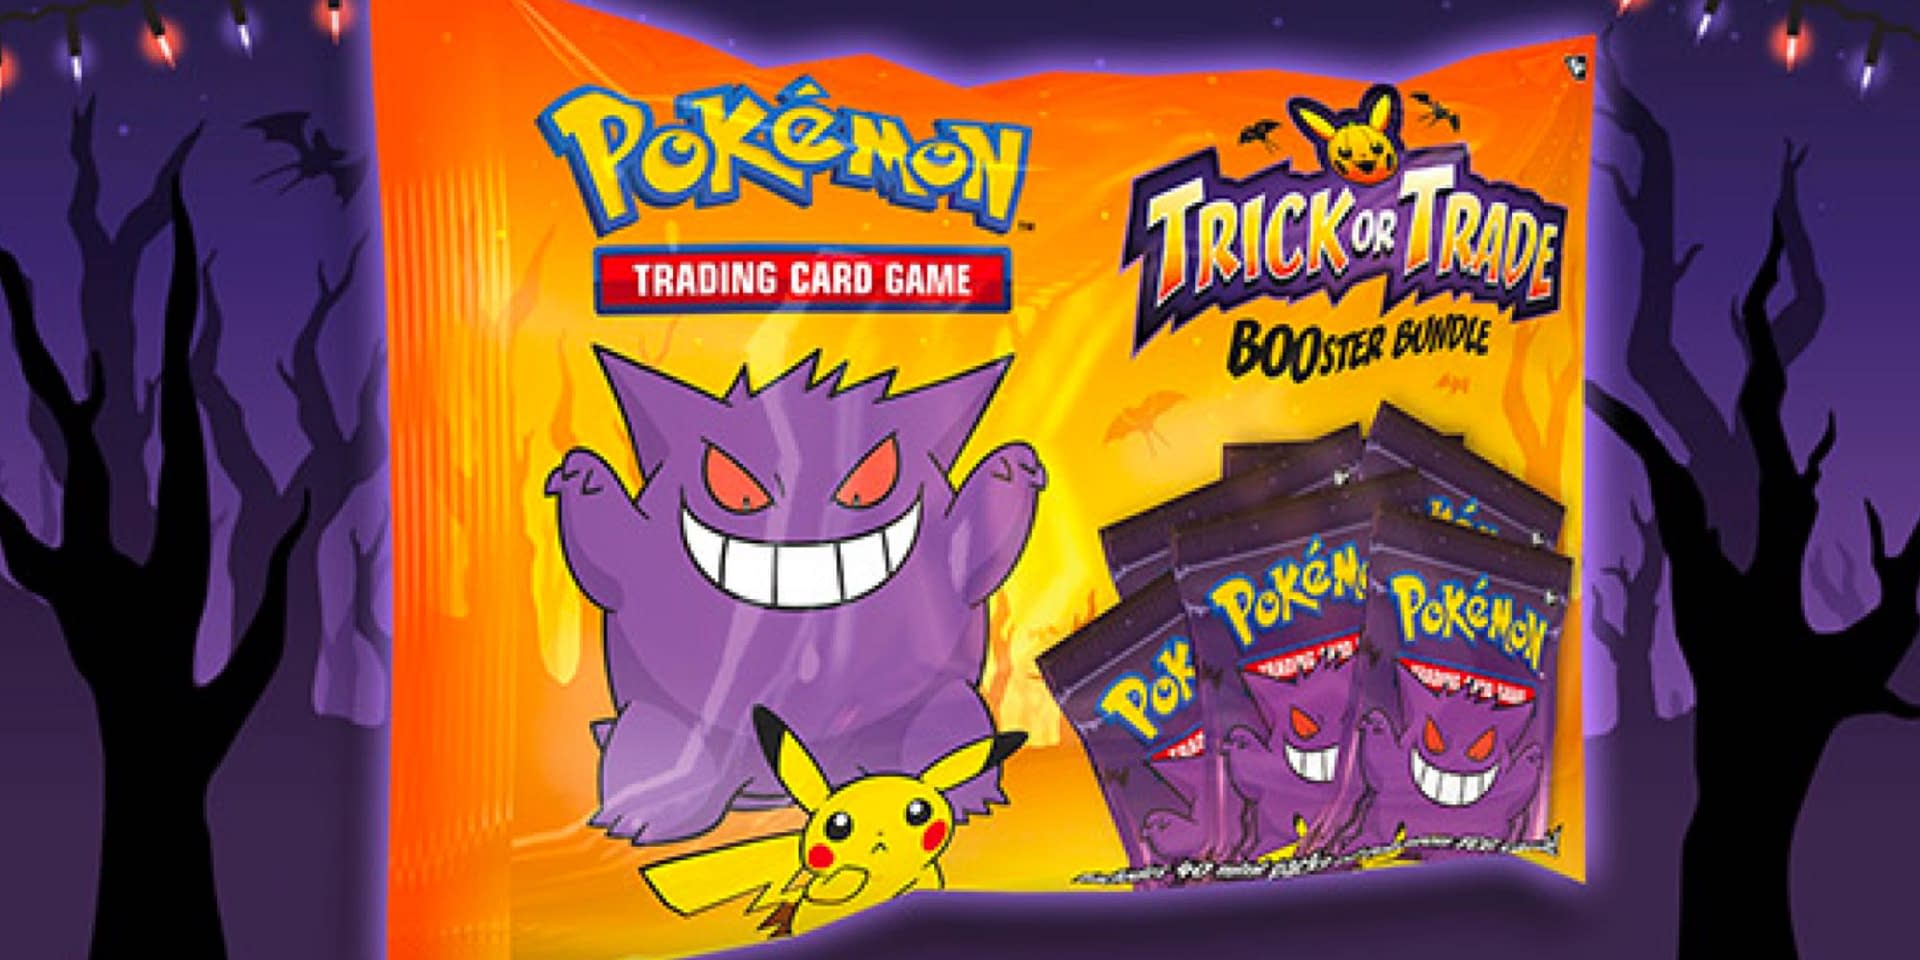 The Pokémon TCG Trick Or Trade BOOster Packs Product Hits Shelves